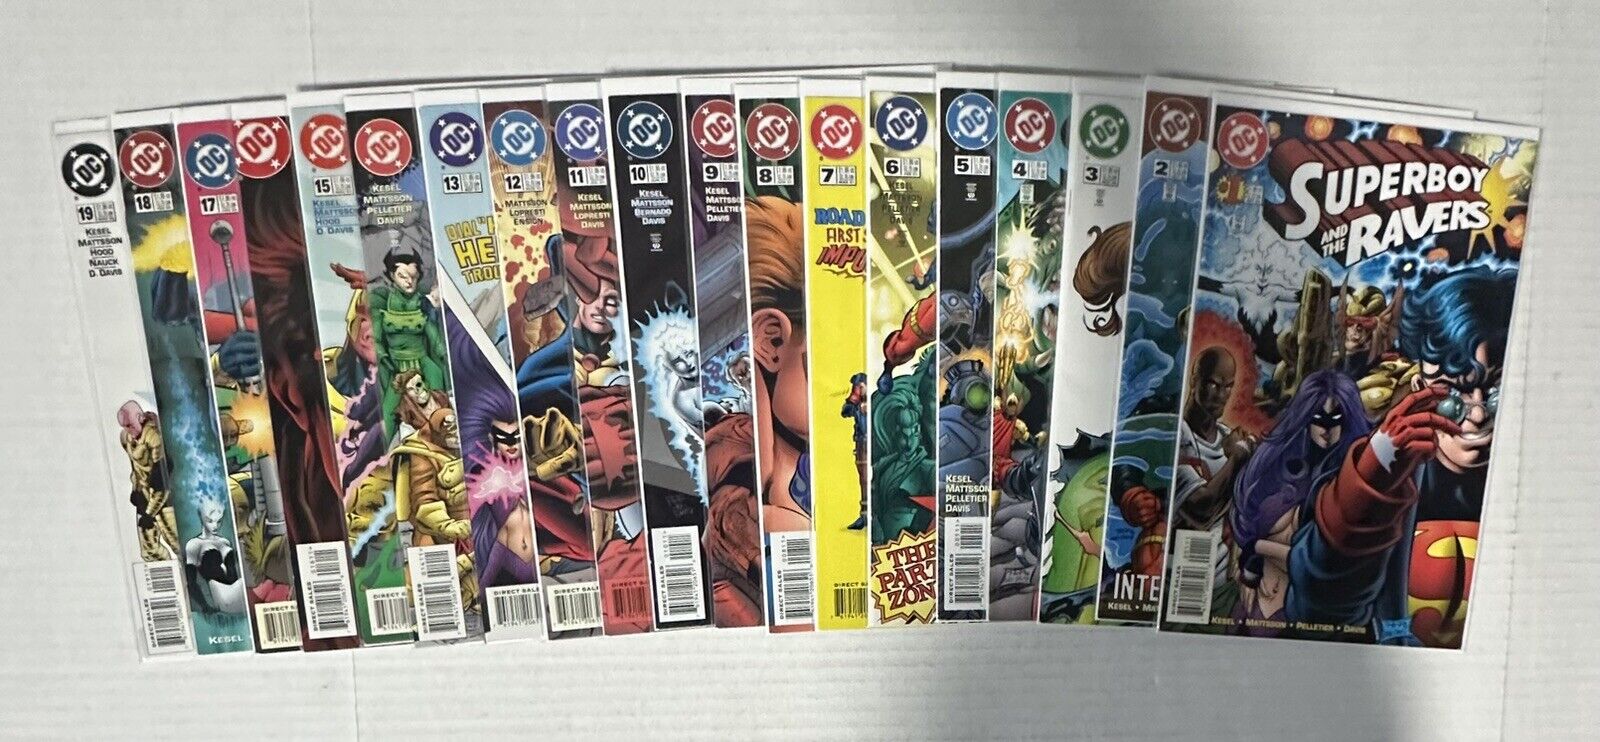 DC: Superboy And The Ravers Vol. 1 (1996) #1-19 Complete Set